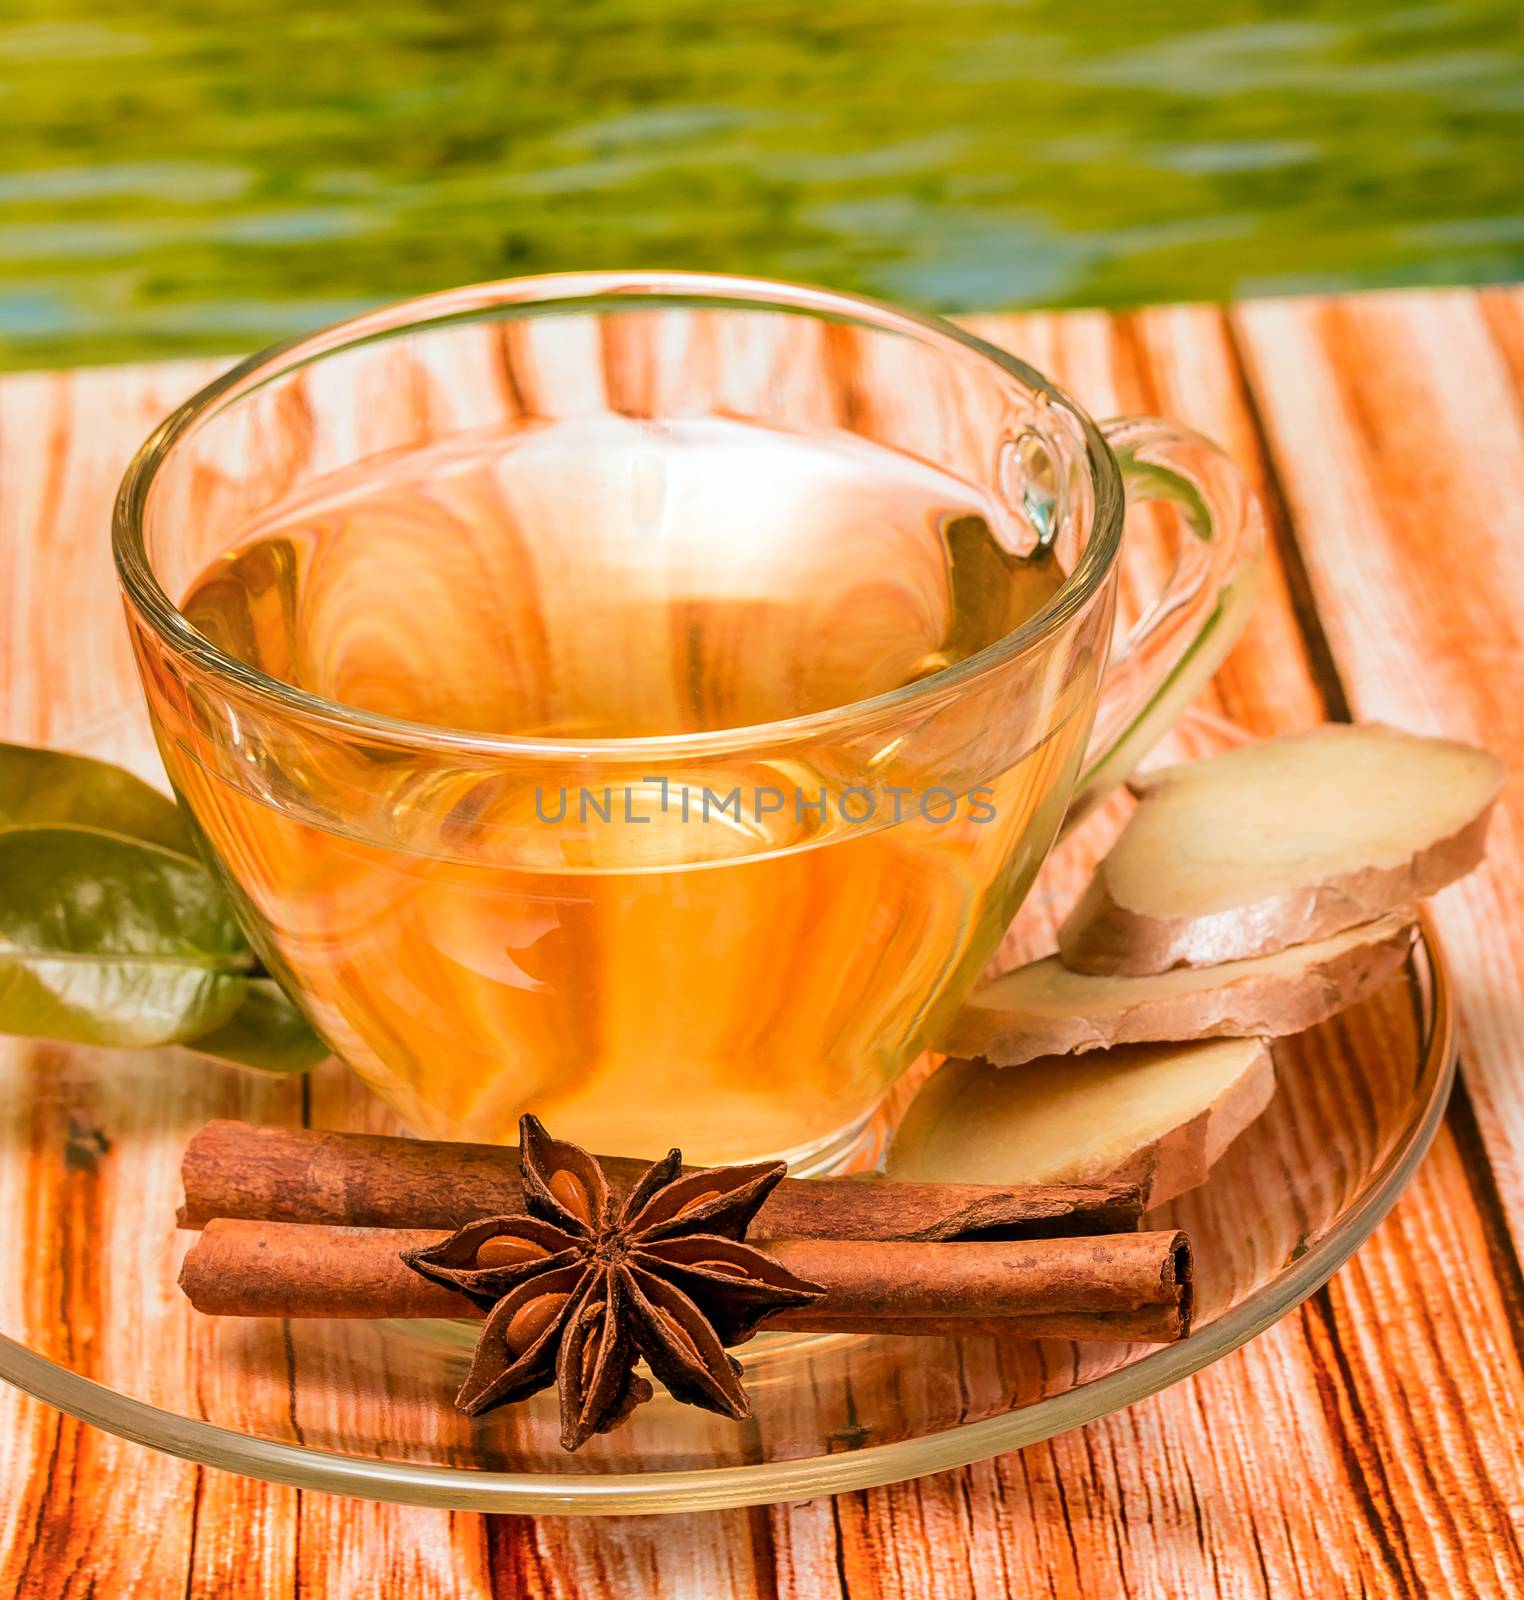 Spiced Ginger Tea Shows Refresh Beverage And Refreshes  by stuartmiles